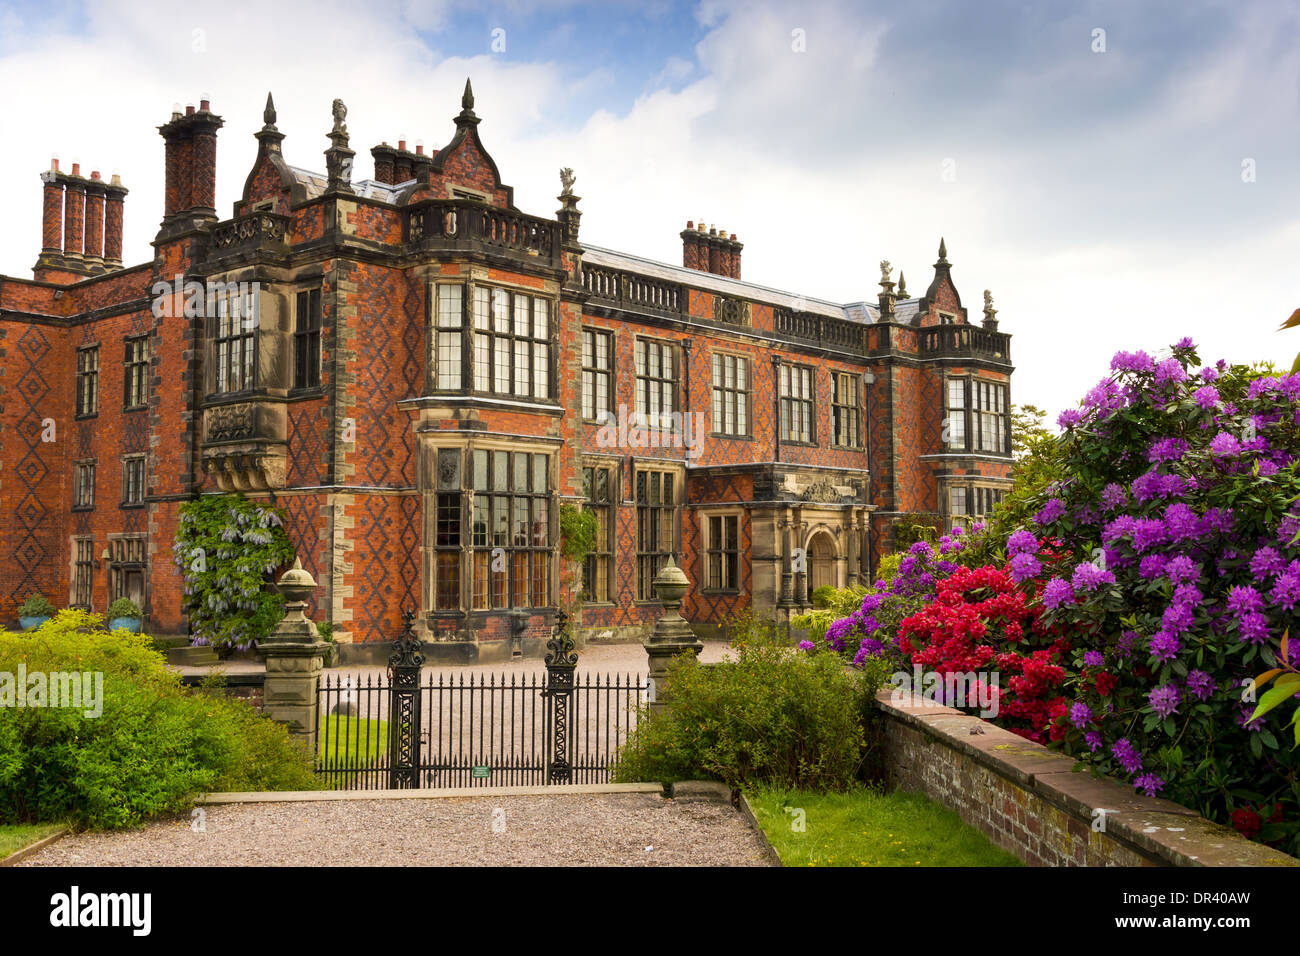 Historic Elizabethan Mansion and grounds in UK. Stock Photo